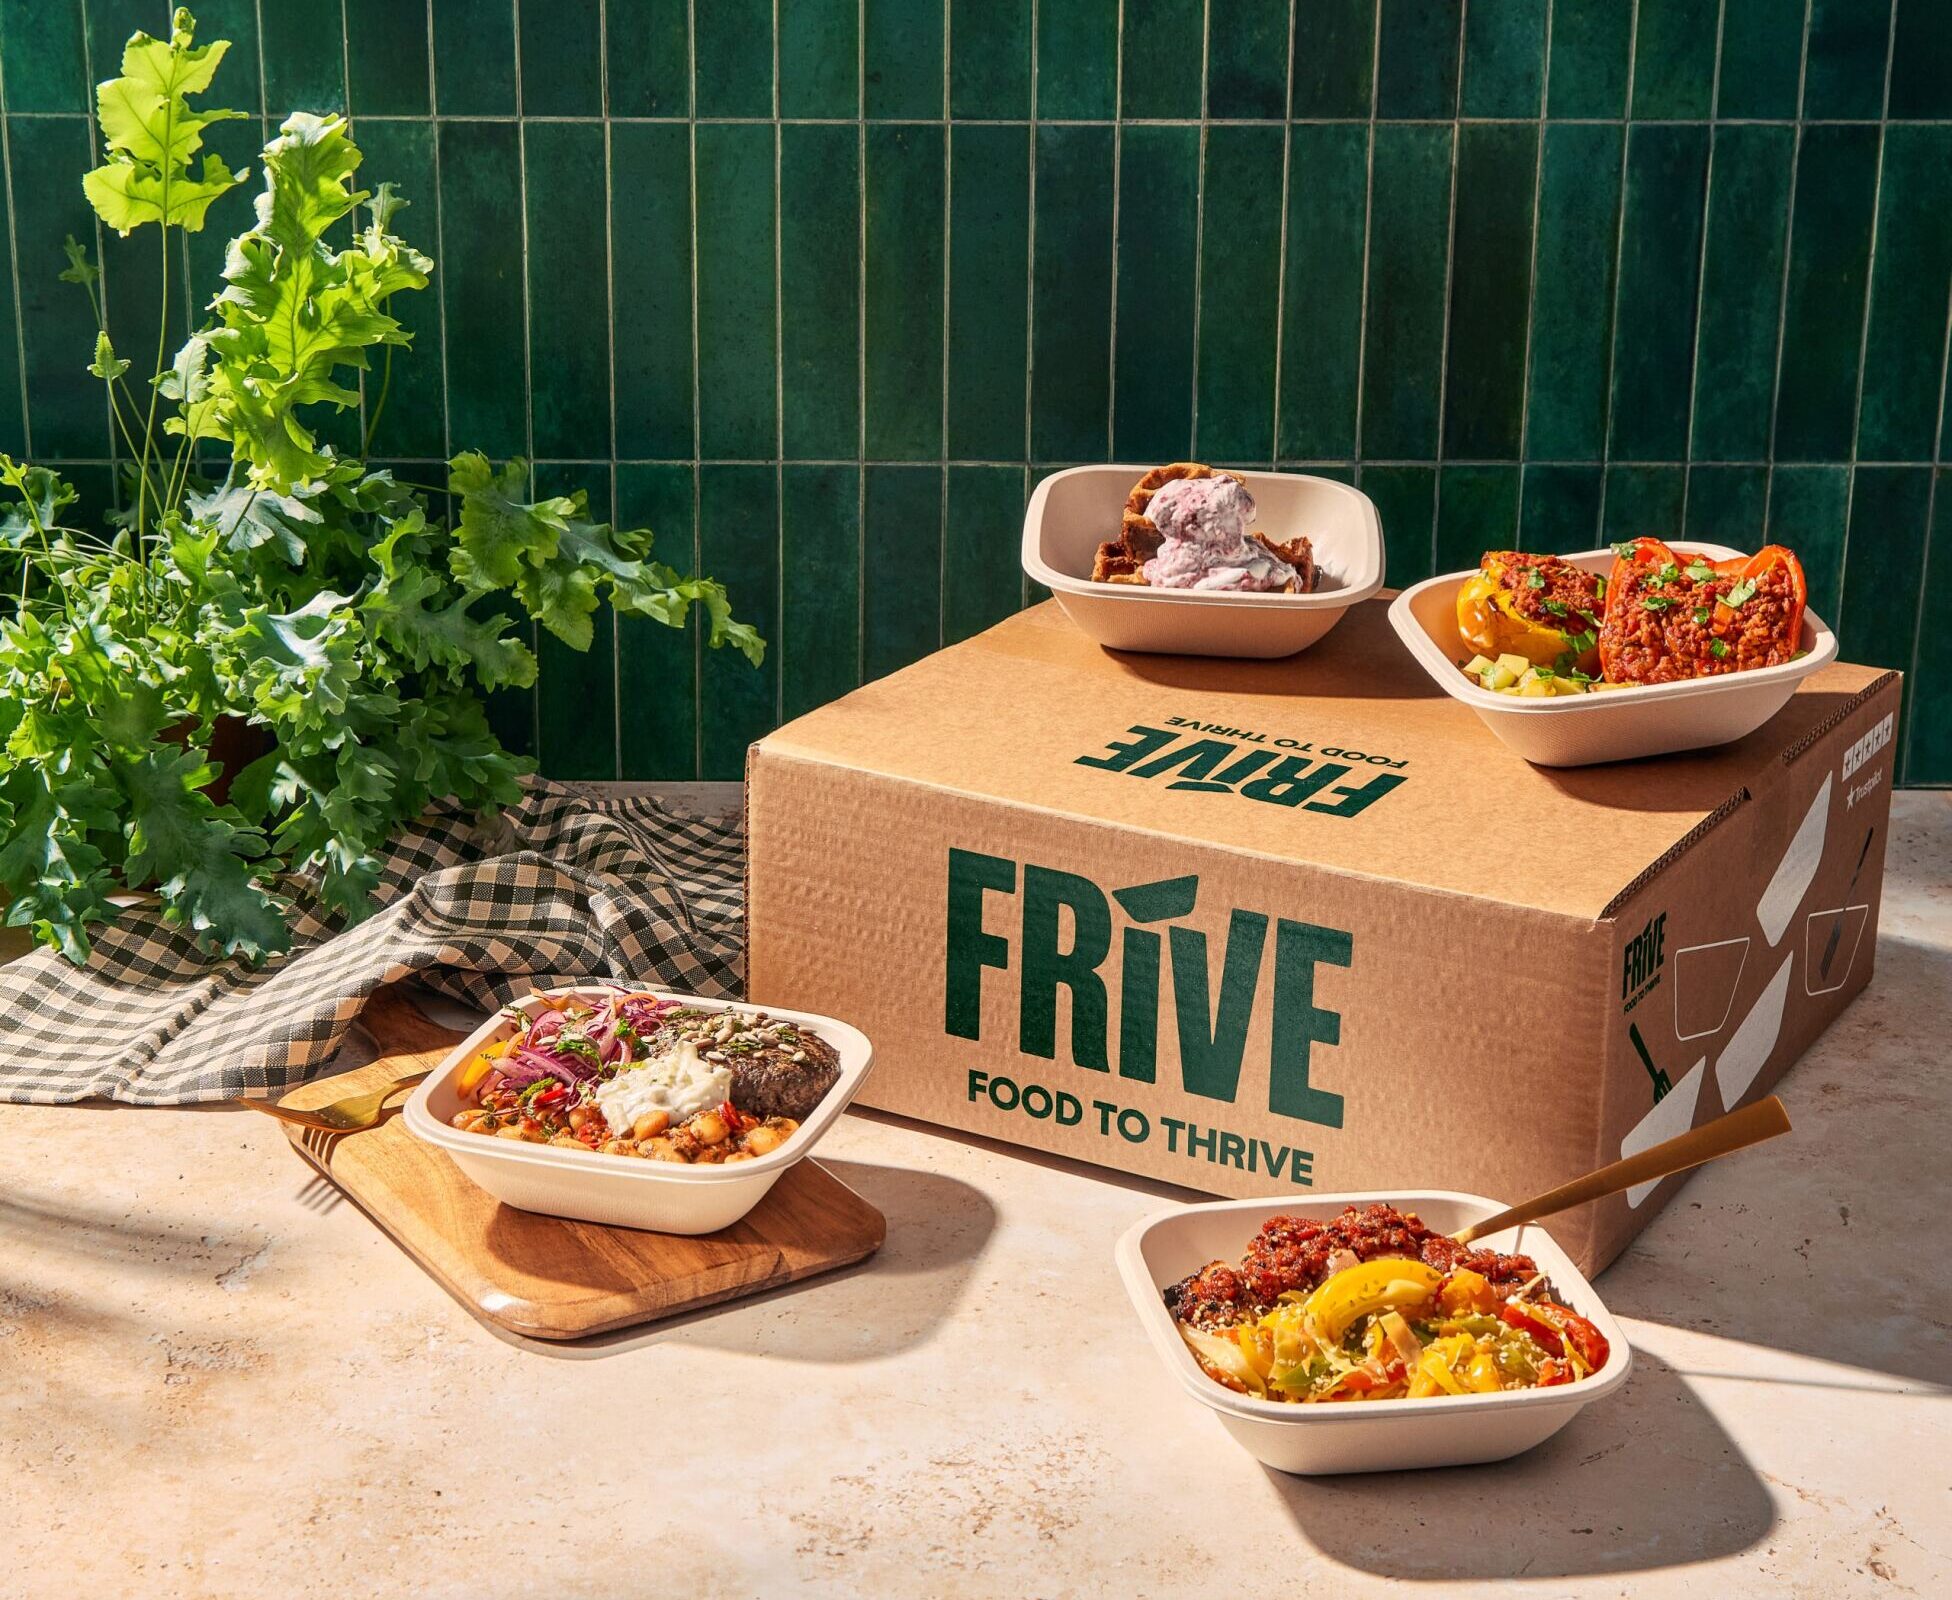 Prepped meals in boxes are scattered on and around a cardboard box with Frive written on it